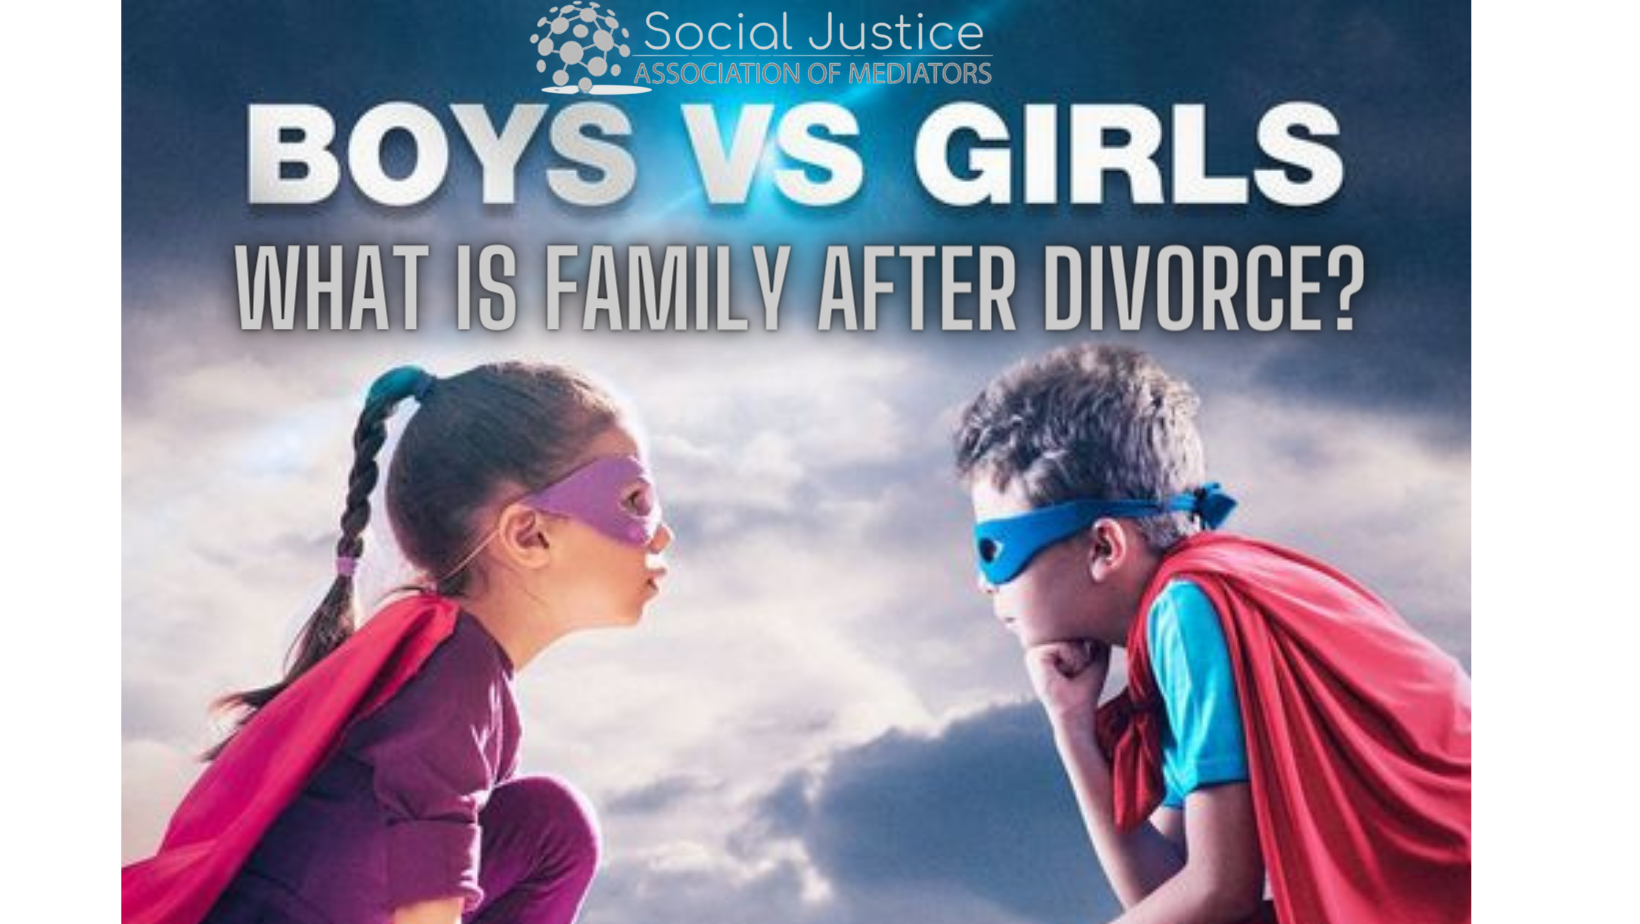 The talk on raising boys vs. girls emphasizes the importance of understanding and embracing differences in parenting styles f